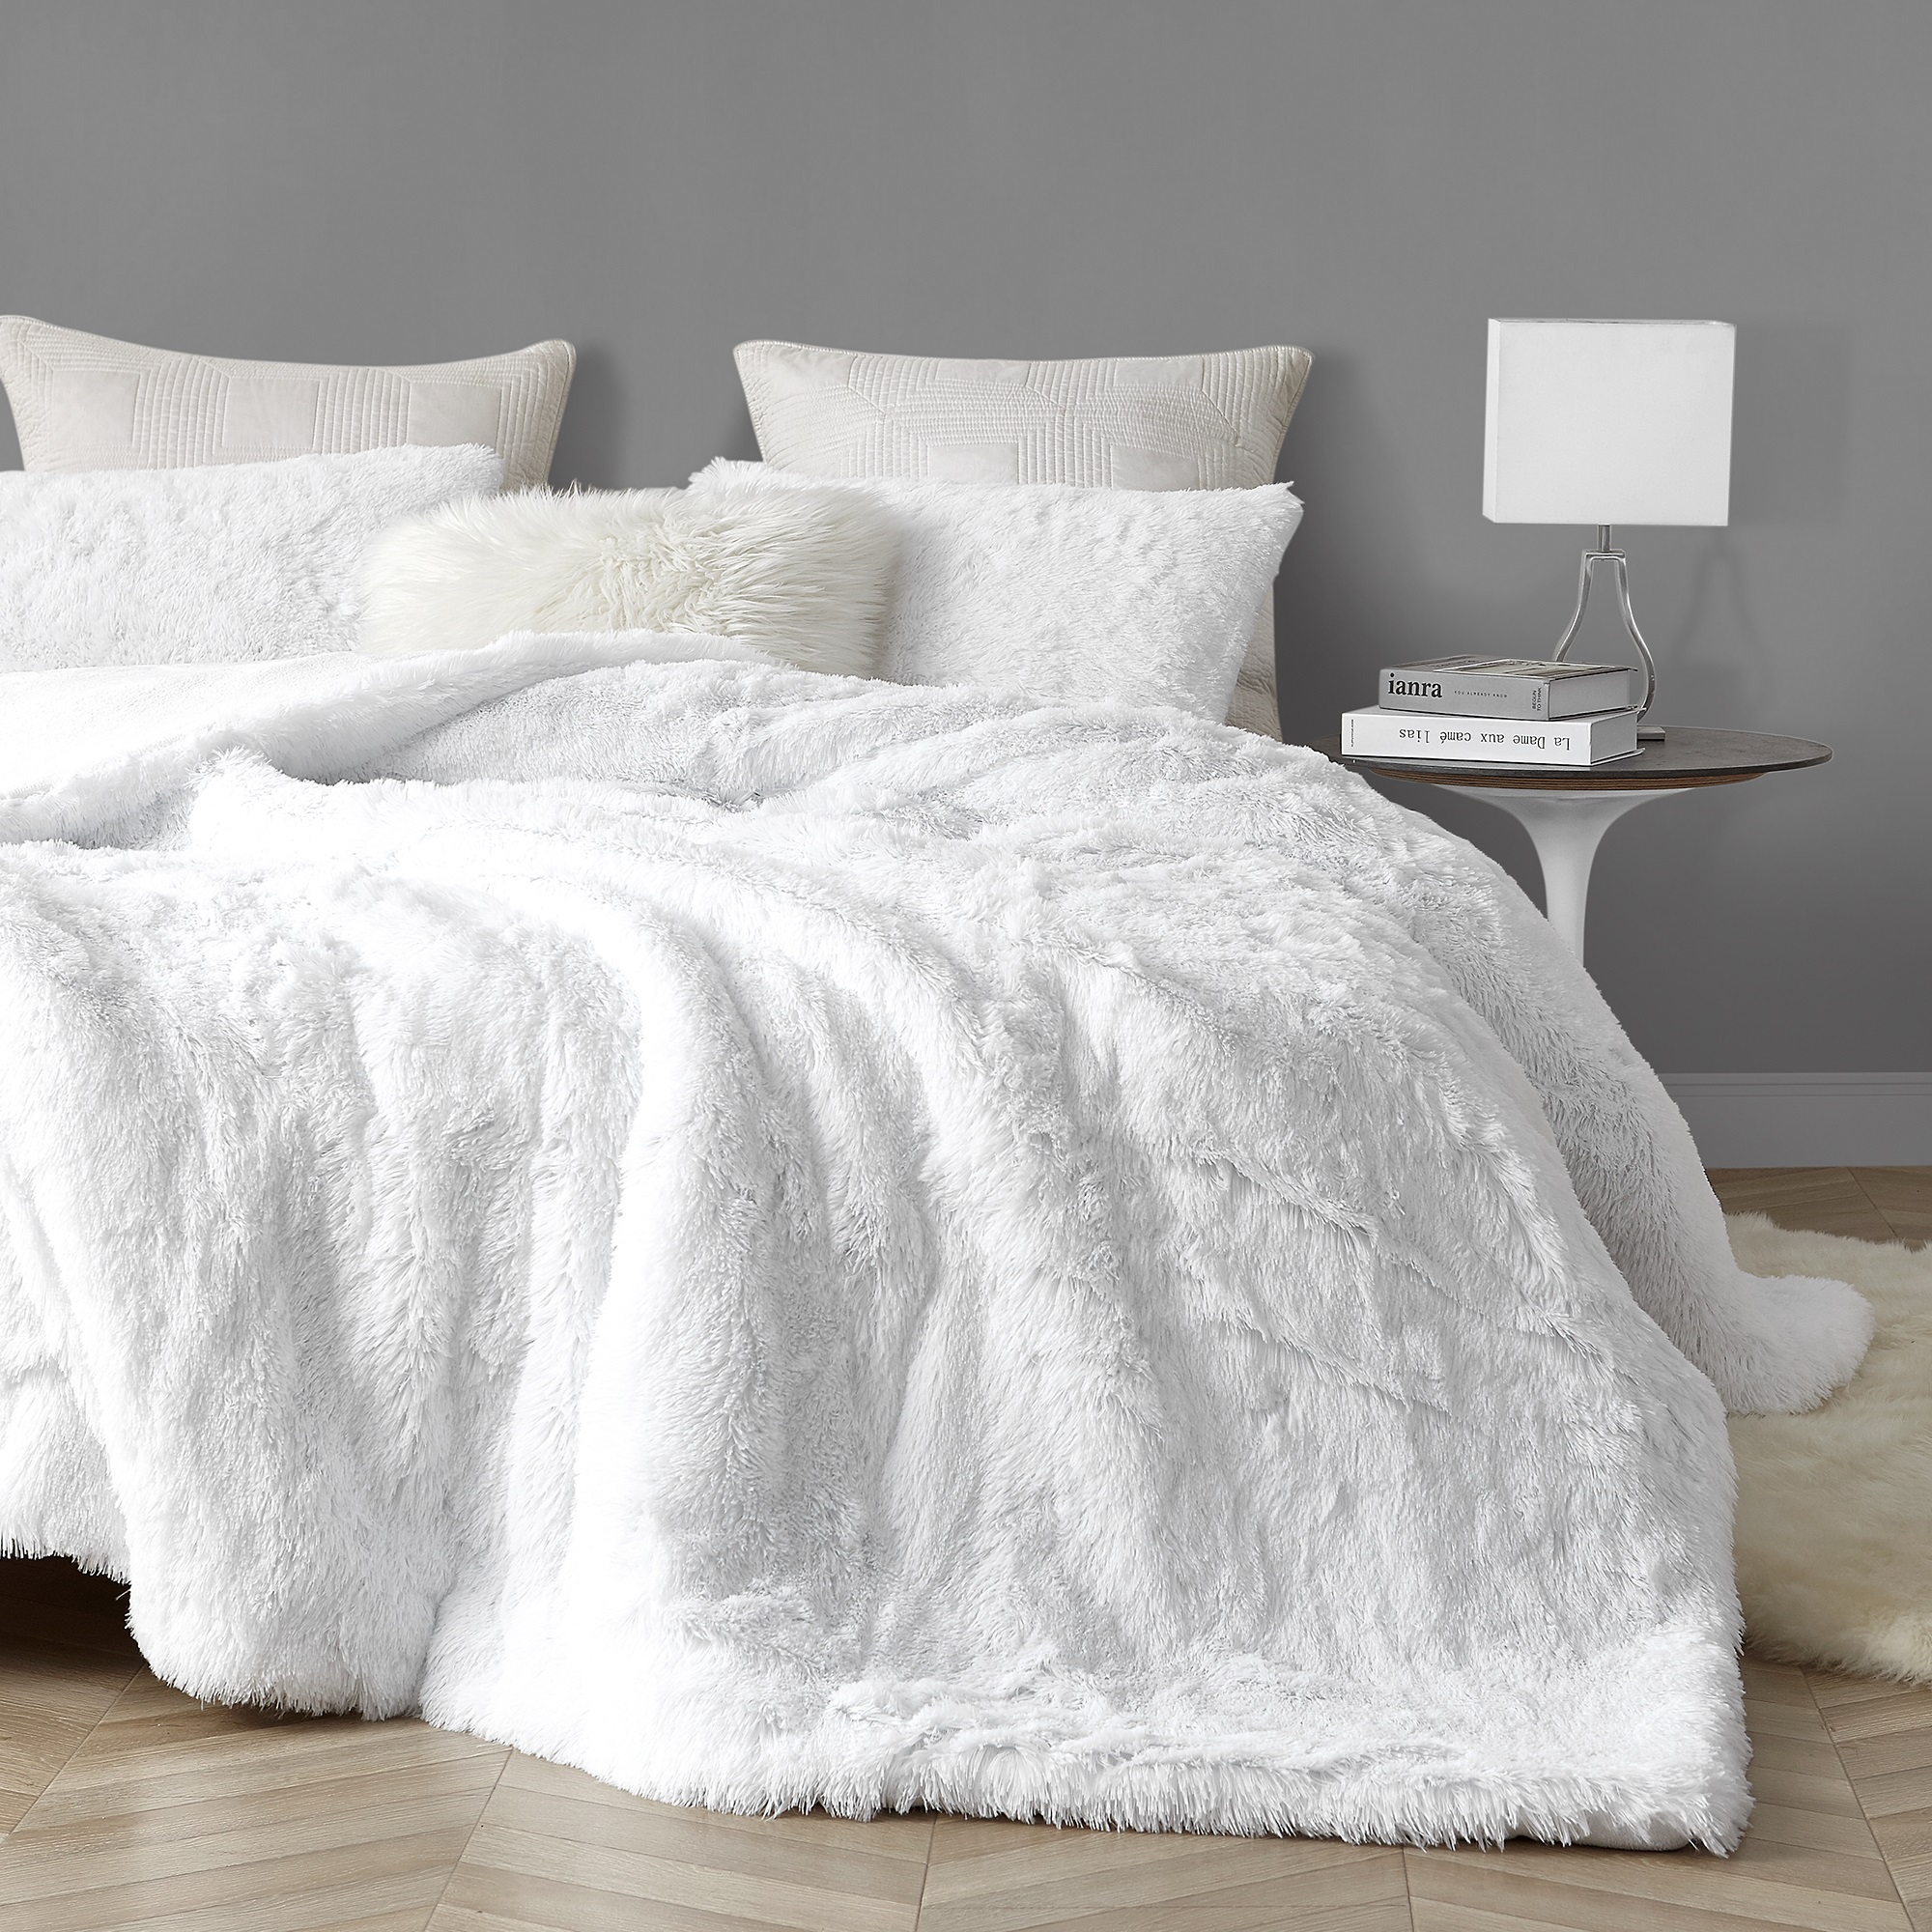 Coma Inducer® Oversized Comforter - Are You Kidding? - White